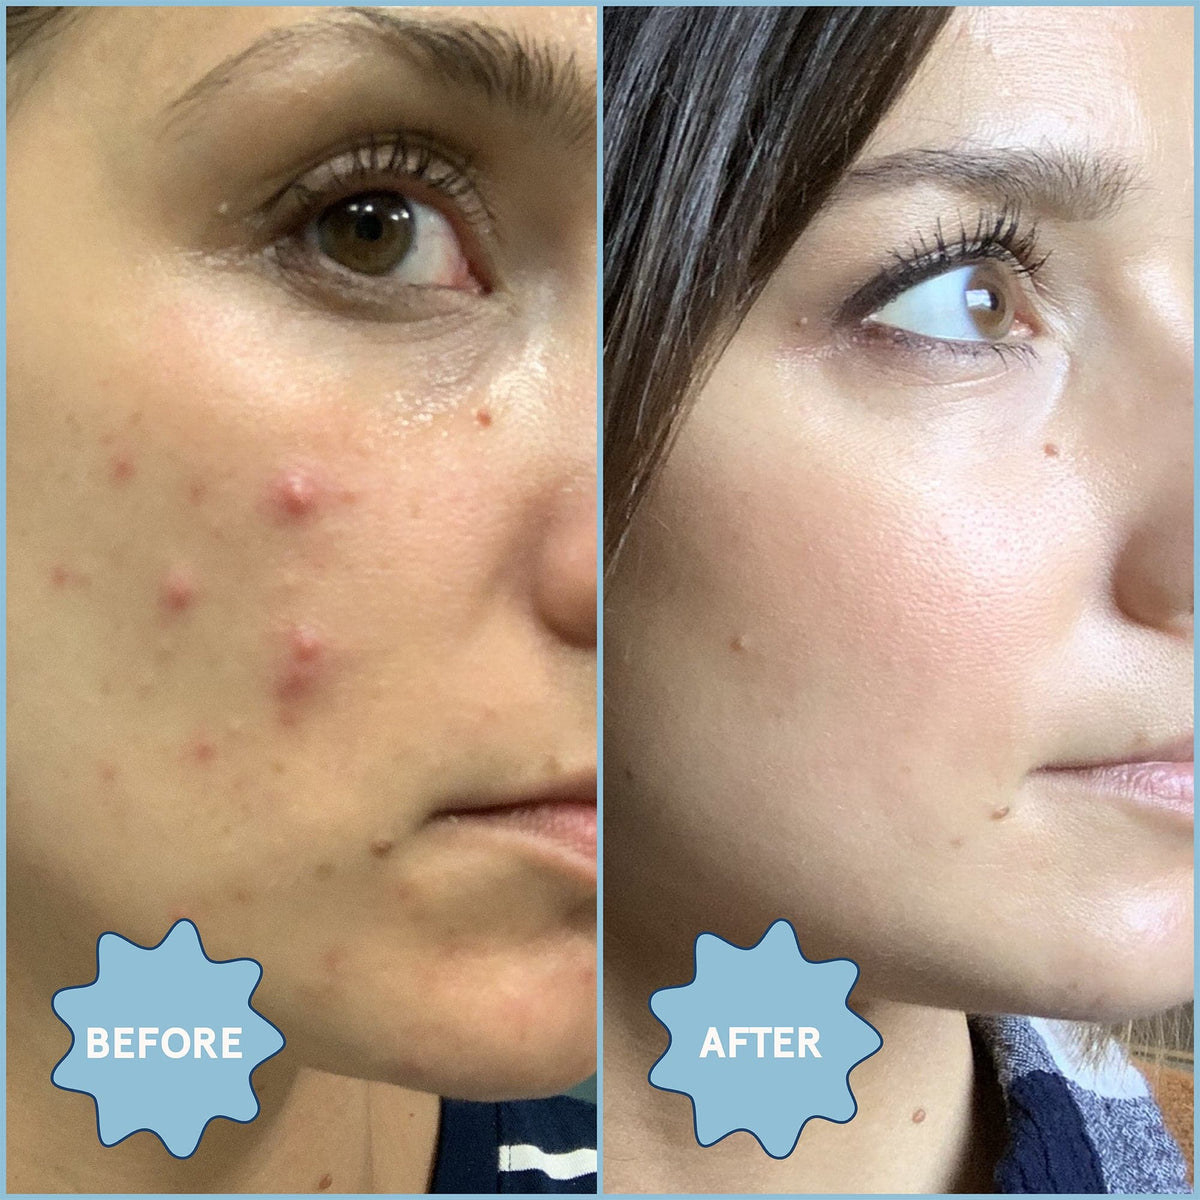 pimples on face before and after